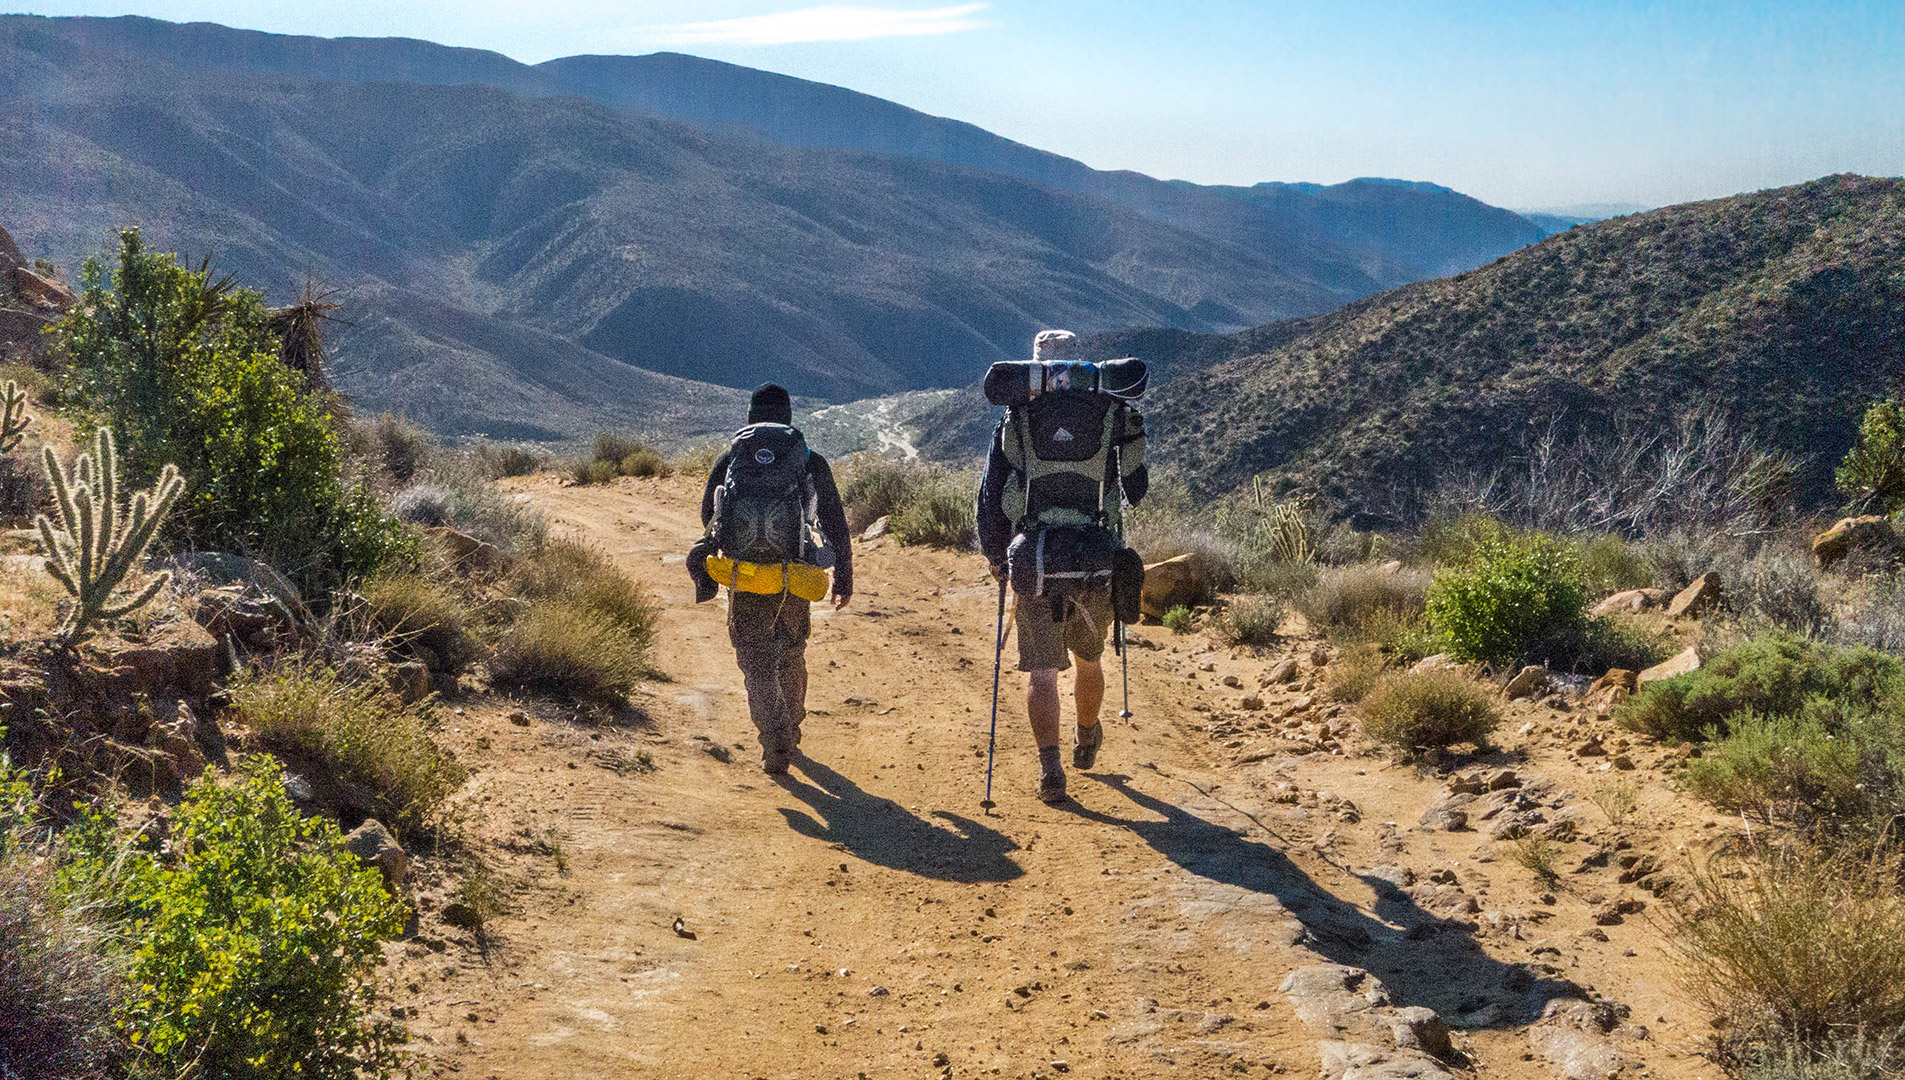 Two backpackers hike down the Juan Bautista de Anza National Historic Trail.